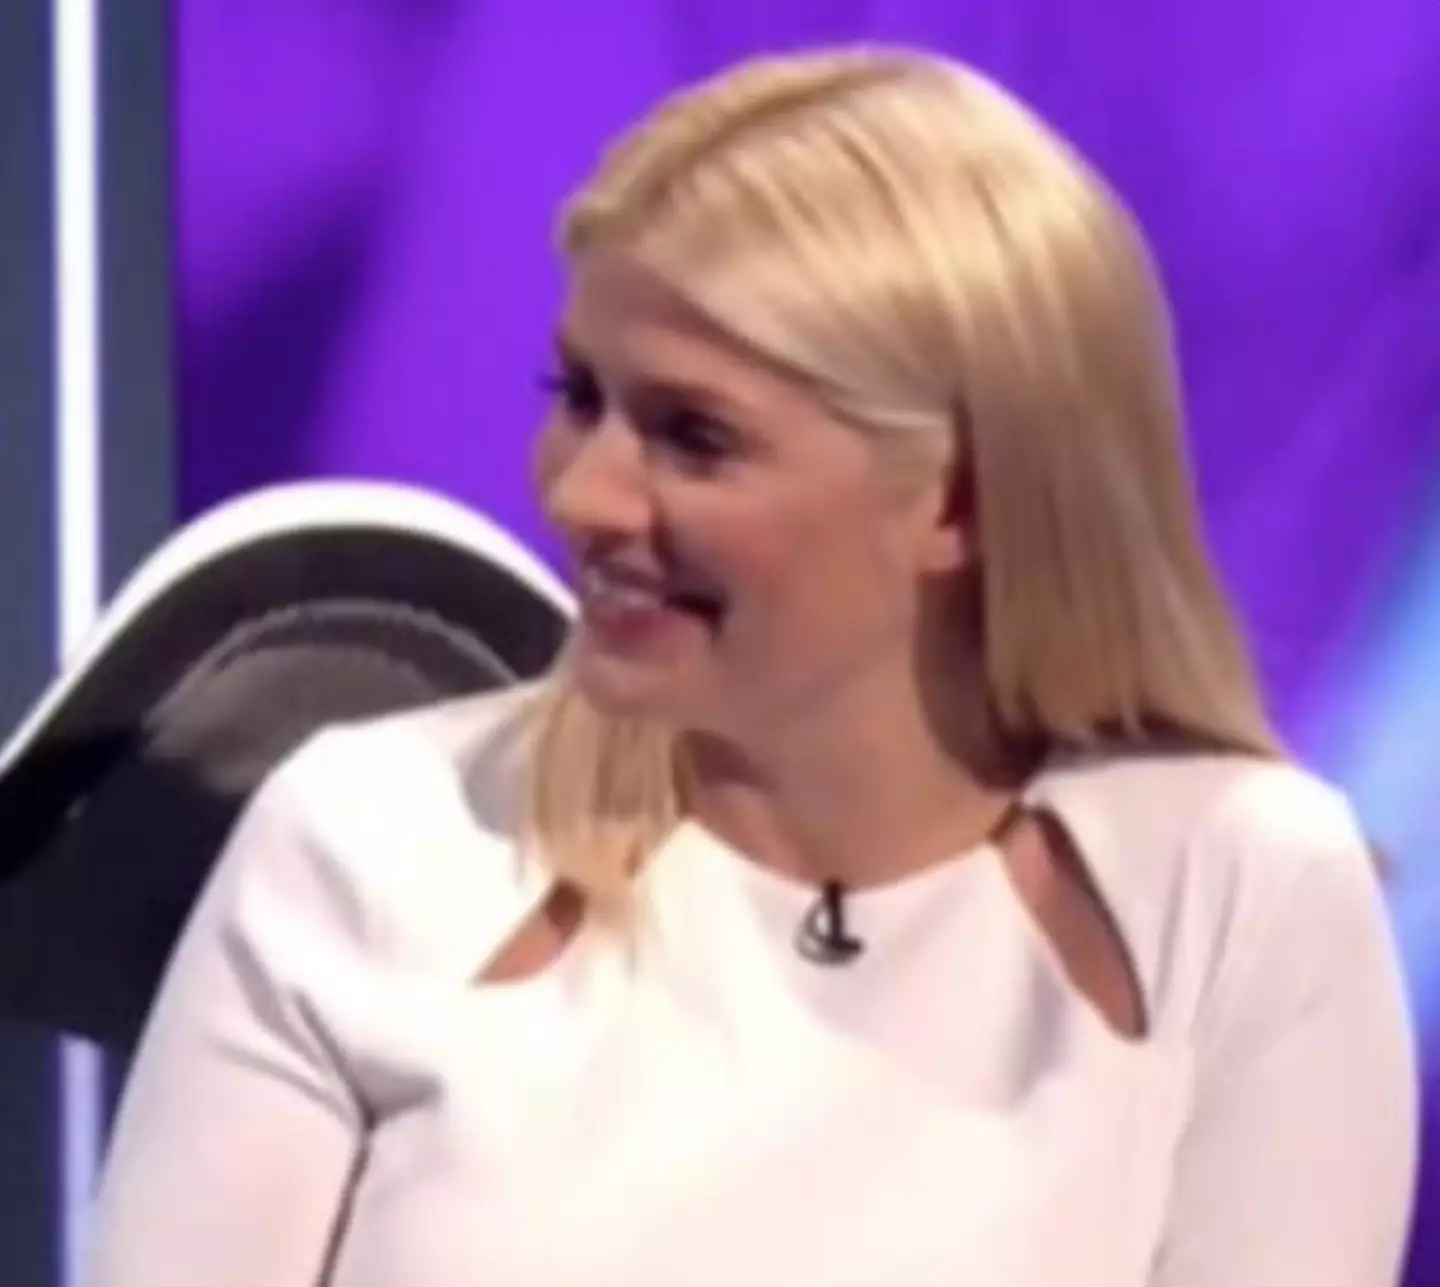 Holly Willoughby was left rather stunned by the admission.